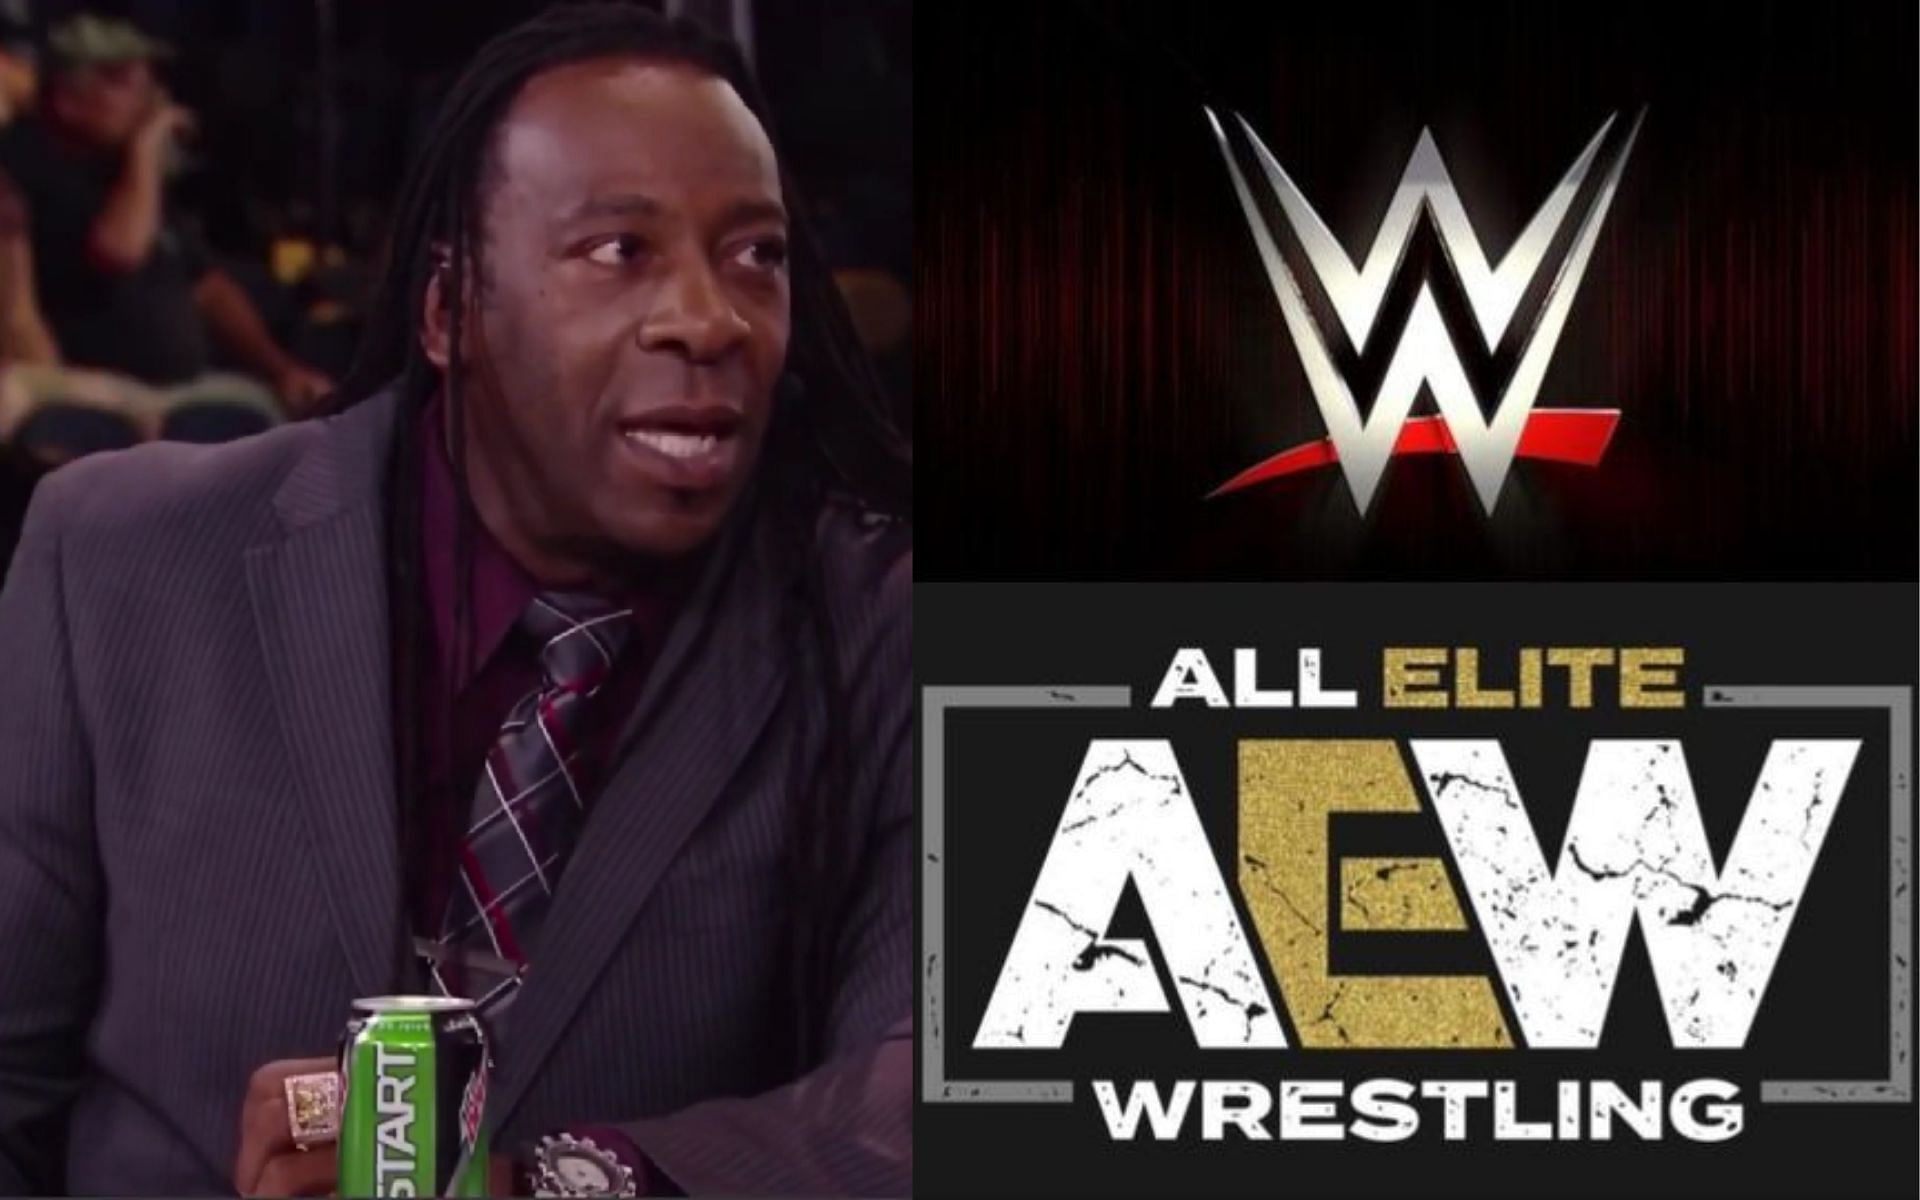 Booker T (left) and WWE and AEW logos (right)